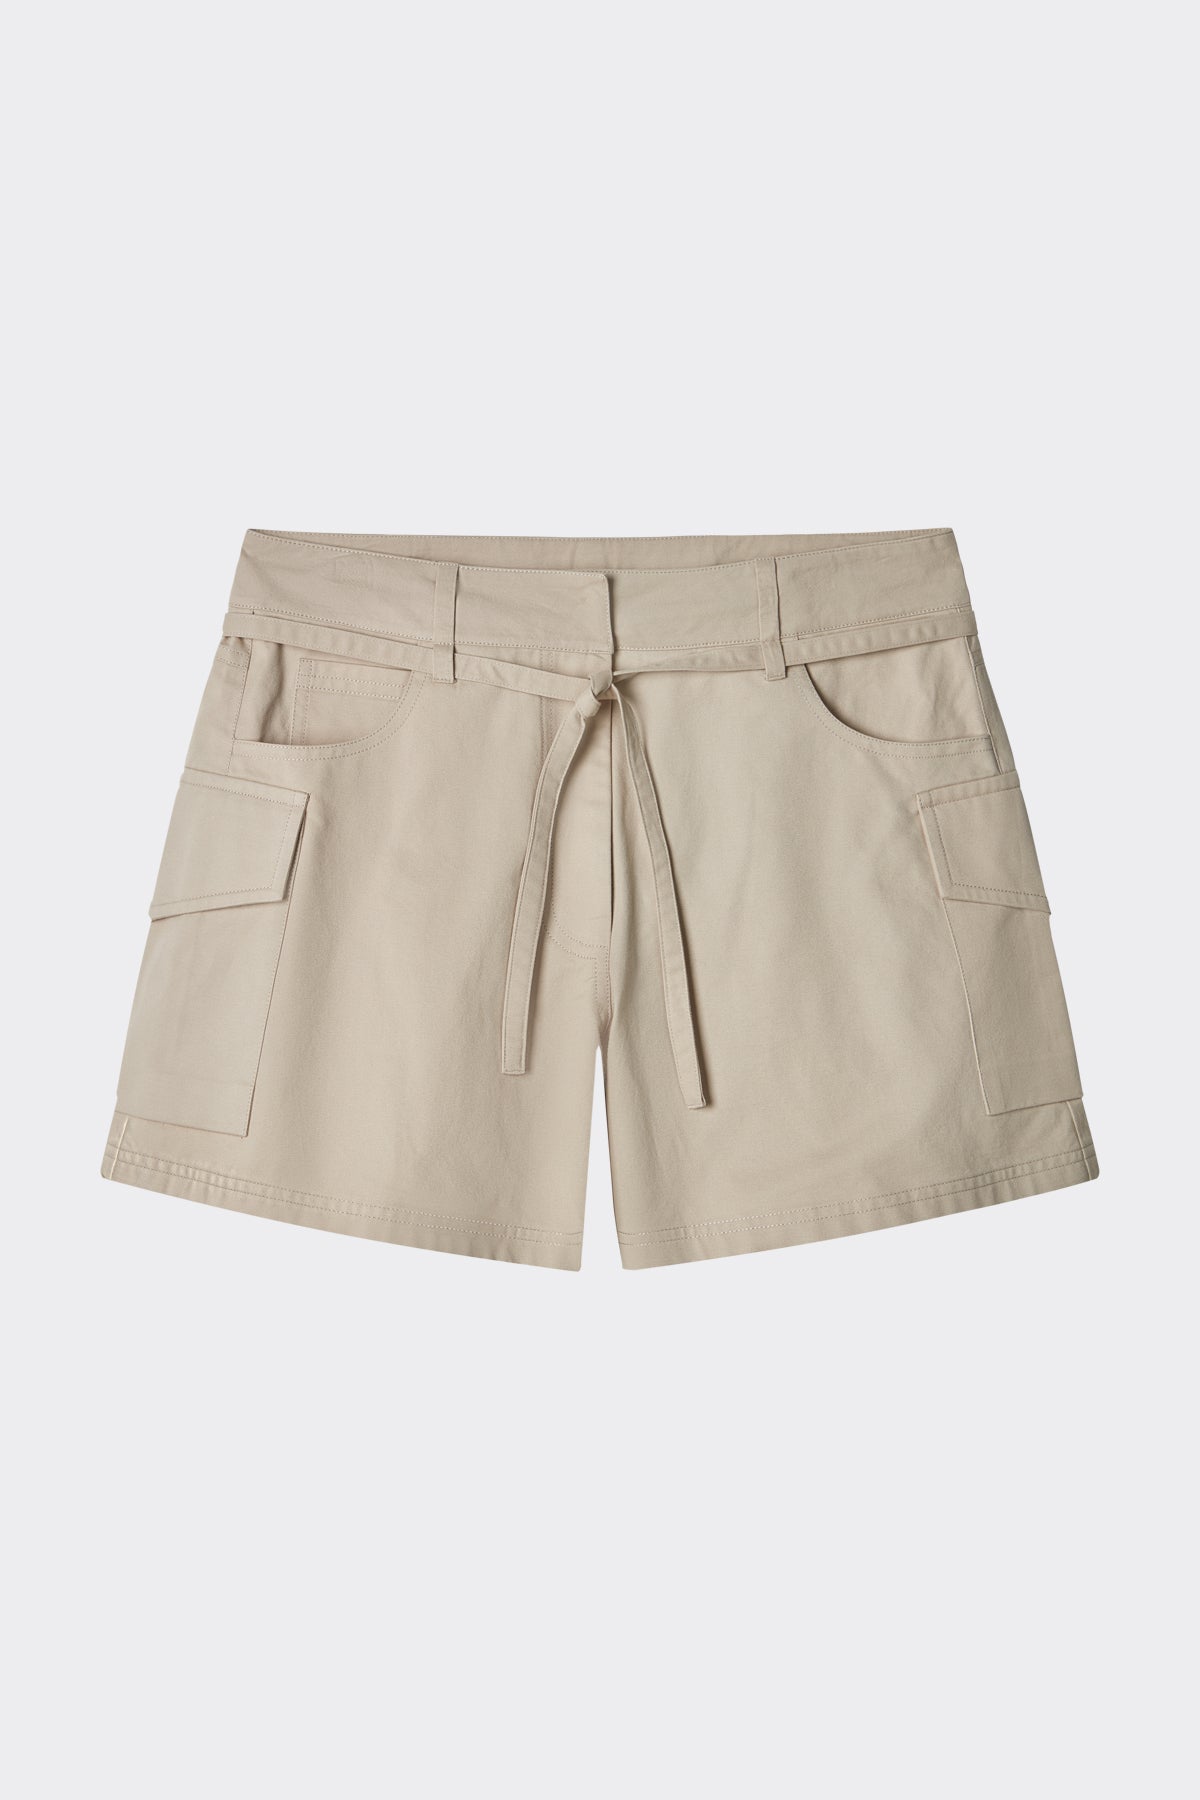 Makena Shorts in Sand| Noon by Noor